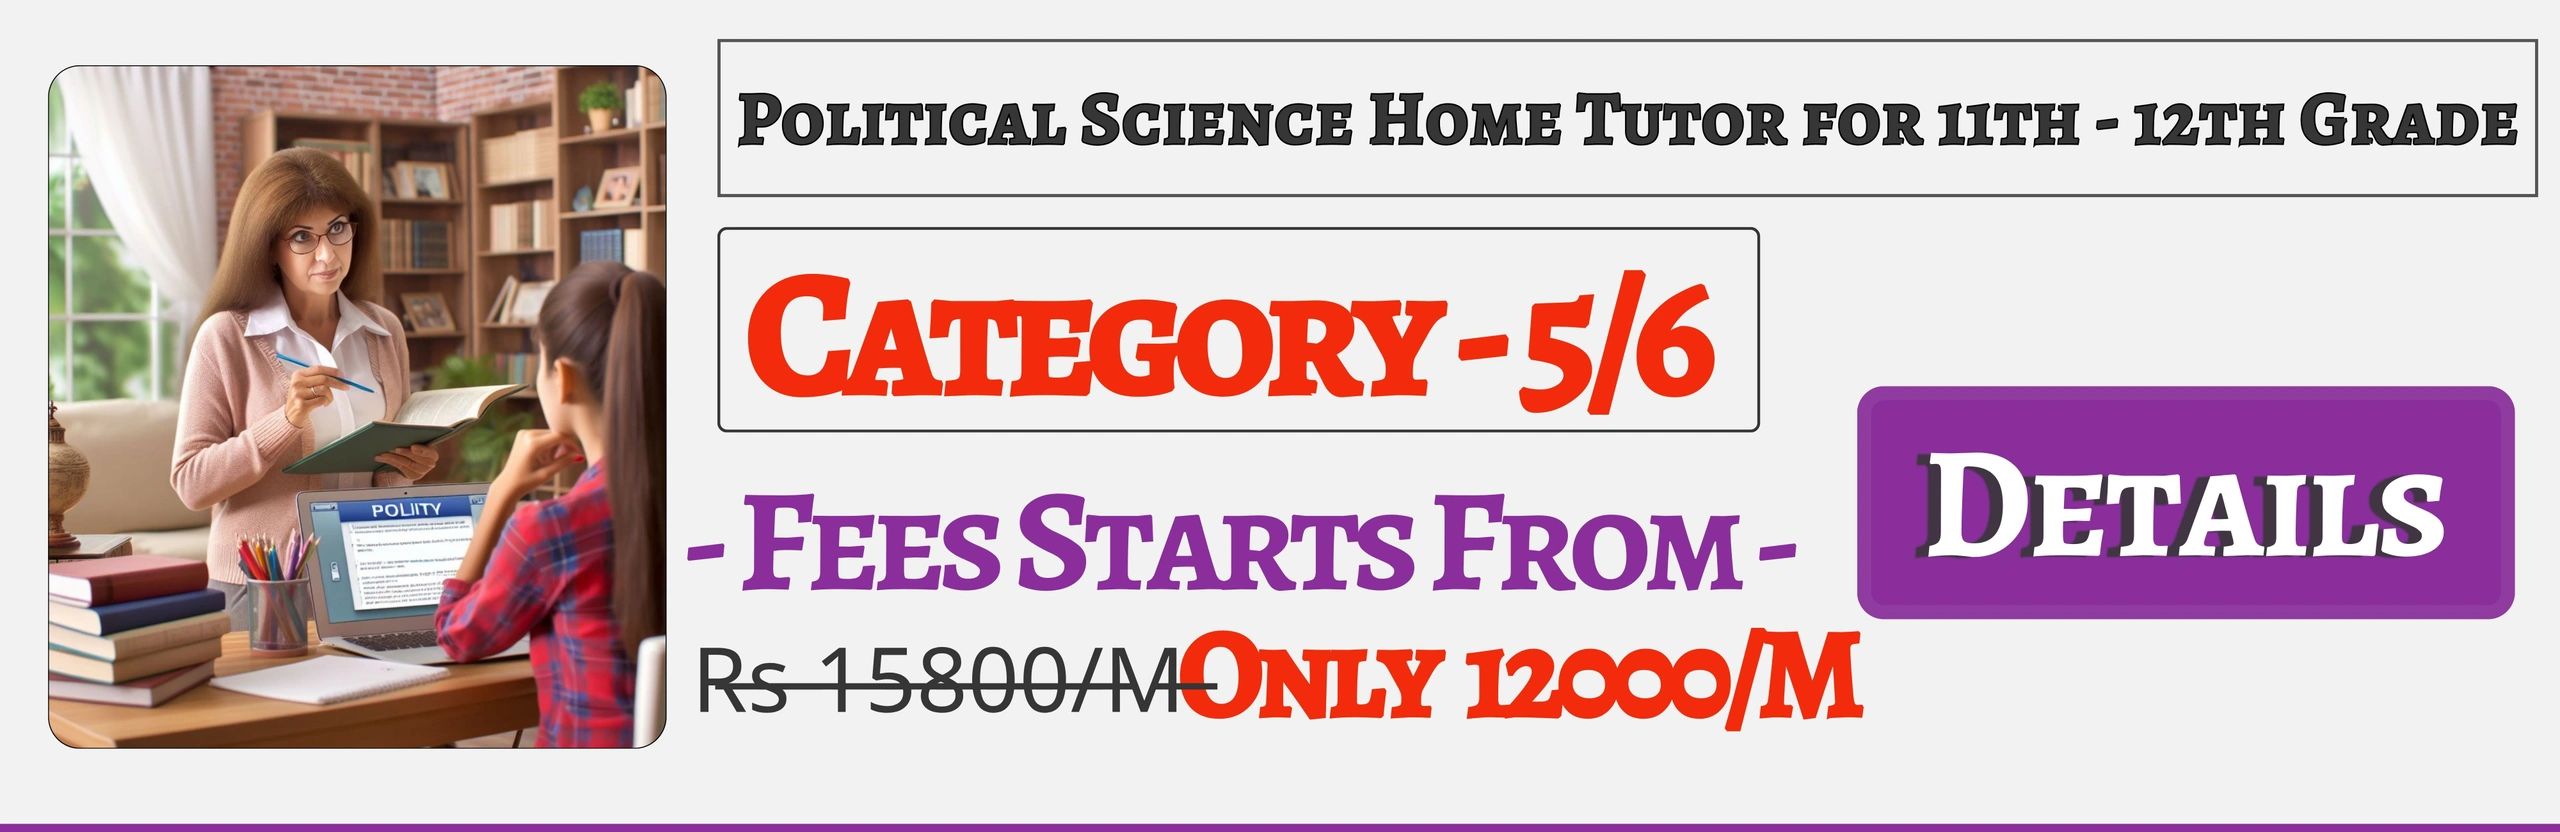 Book Best Nearby Political Science Home Tuition Tutors For 11th & 12th In Jaipur , Fees Only 12000/M